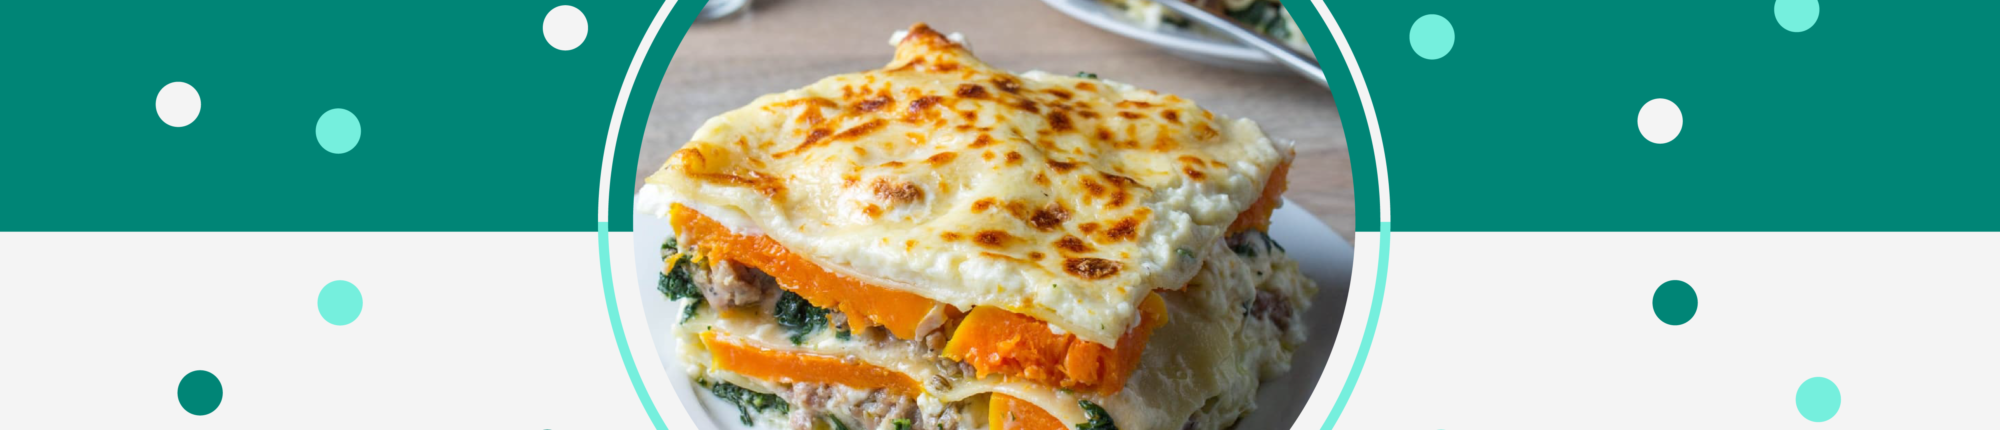 Cheesy, veggie lasagna on plate. Layers of noodles, butternut squash, sausage, sage, and cheese